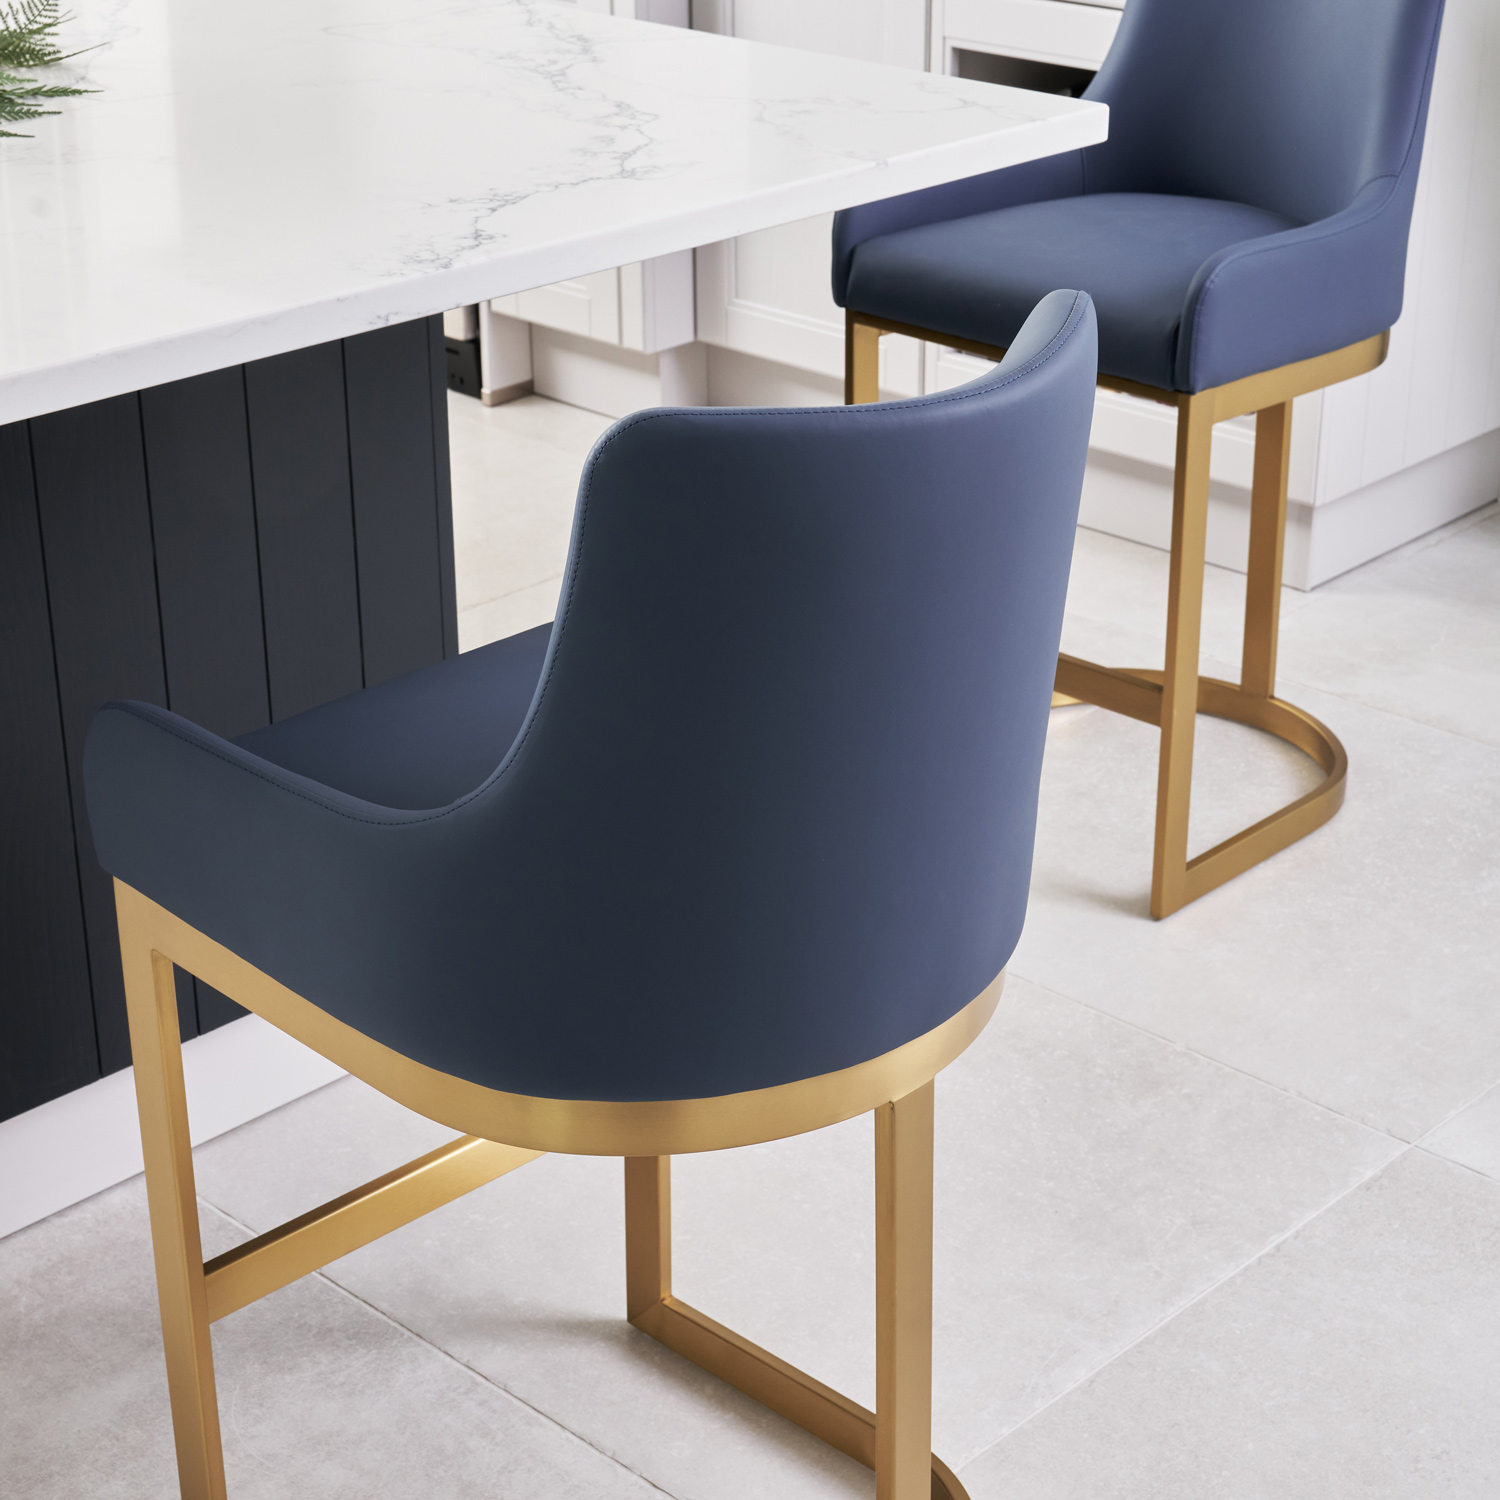 Clara Blue Upholstered Counter Kitchen Stool with Gold Steel Frame